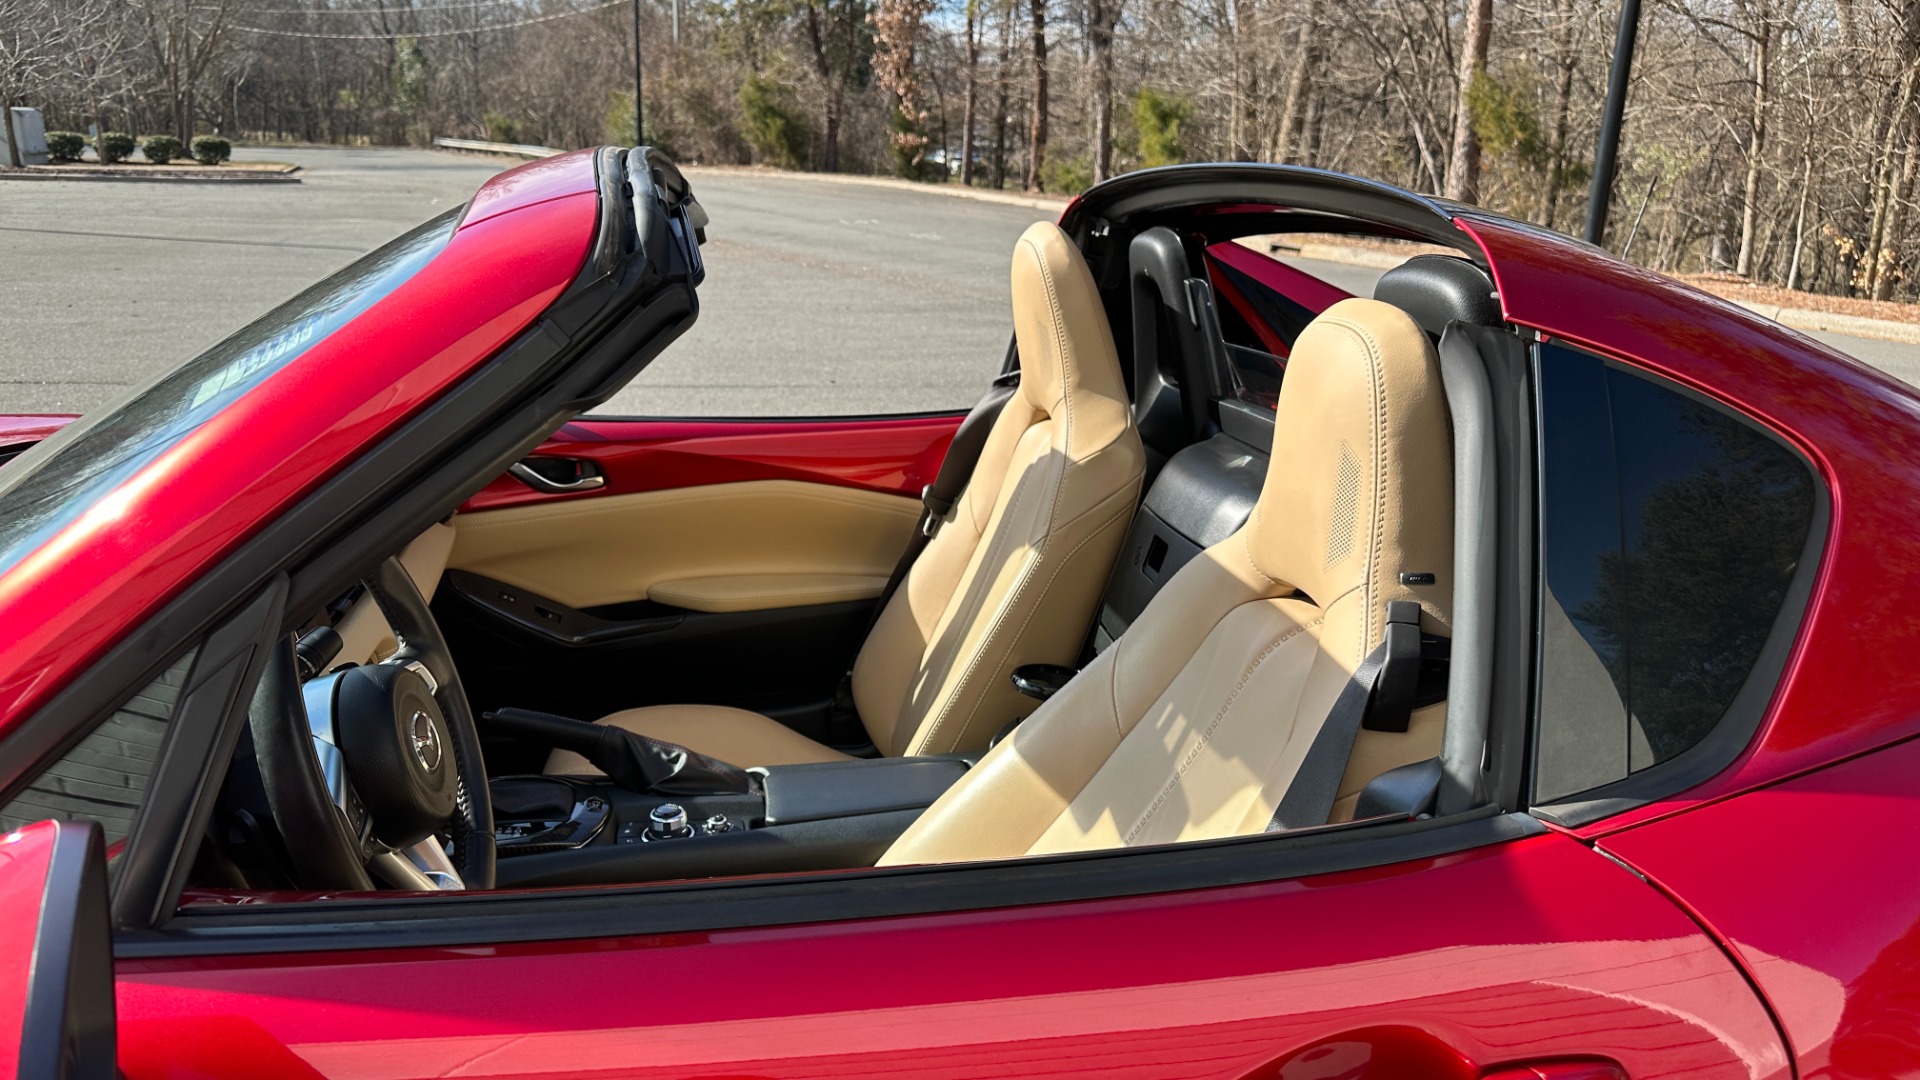 Used 2017 Mazda MX-5 Miata RF GRAND TOURING / POWER HARD TOP CONVERTIBLE / AUTOMATIC for sale $22,995 at Formula Imports in Charlotte NC 28227 32